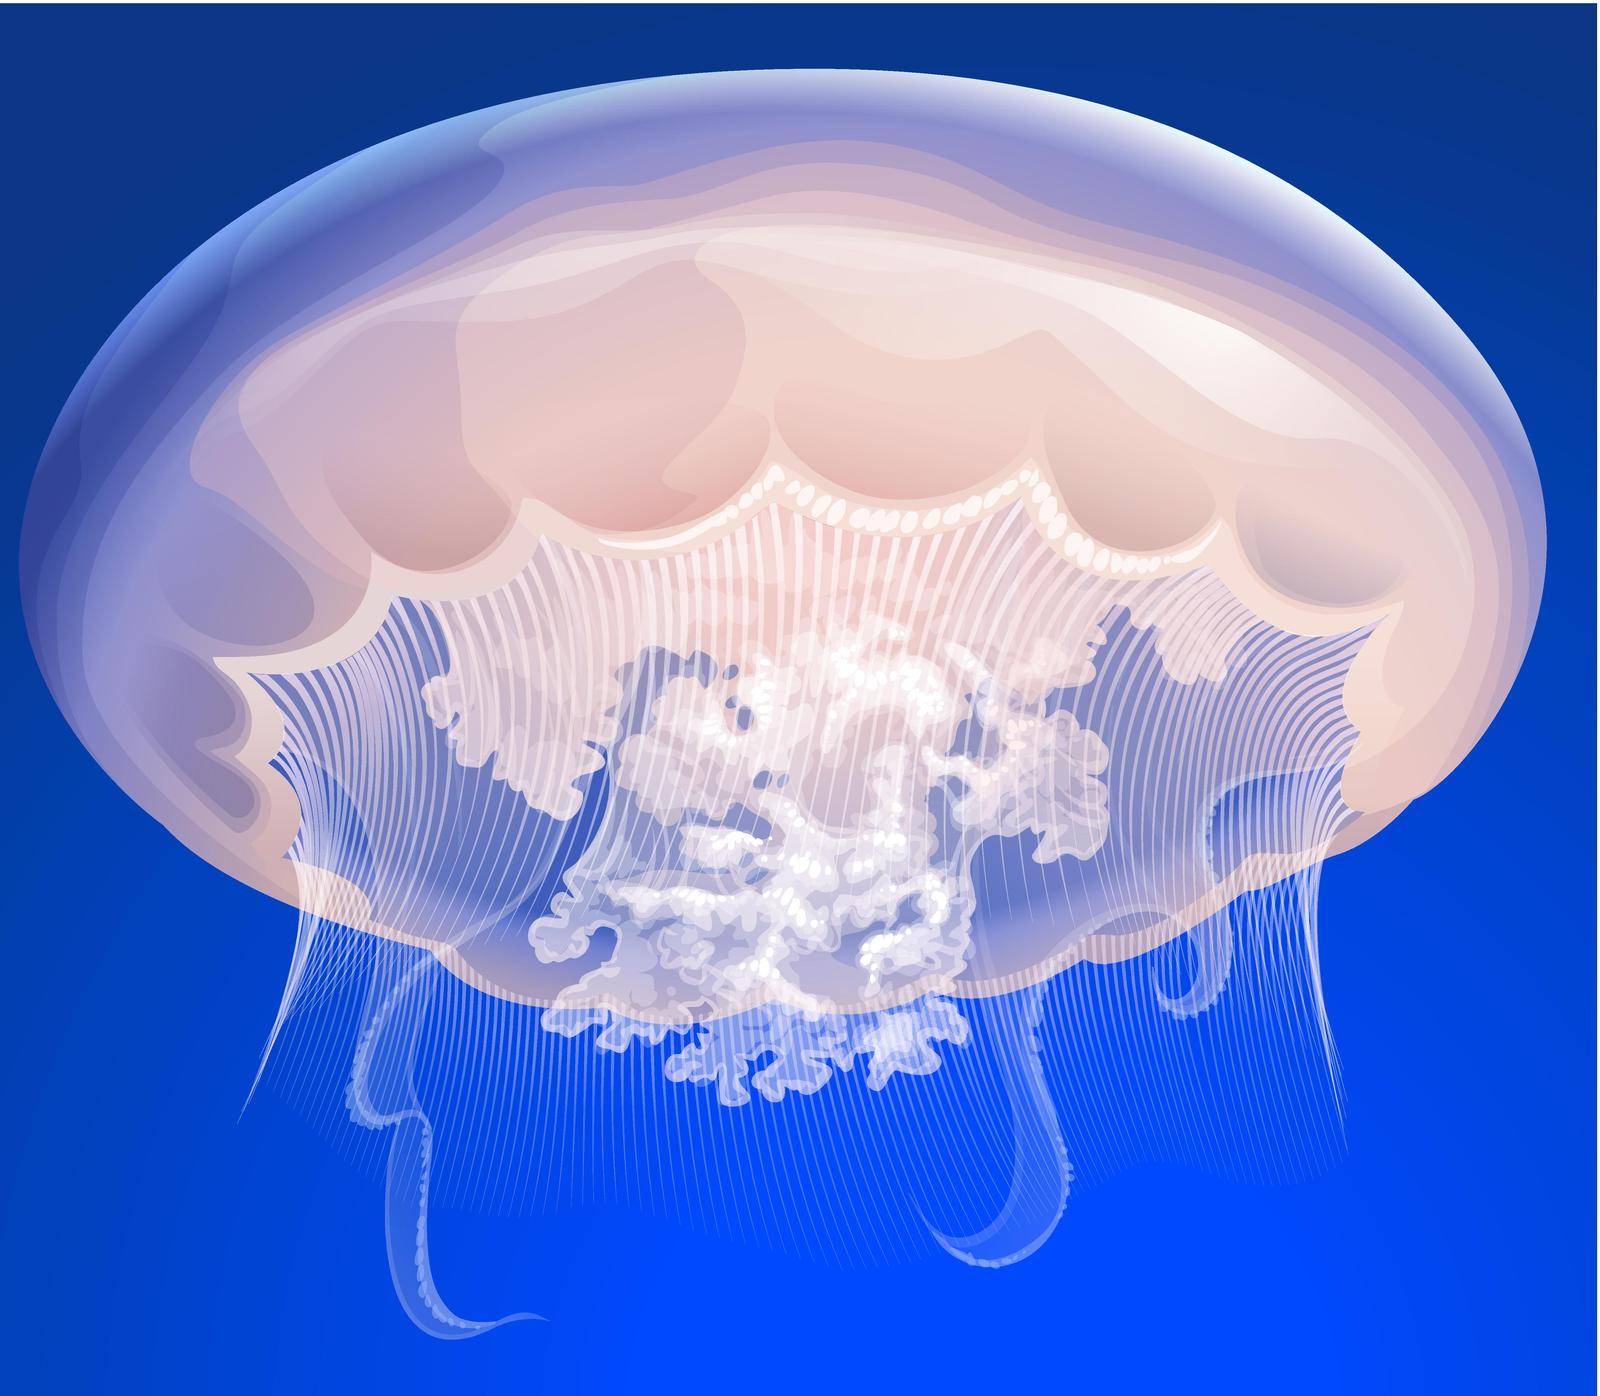 Jelly Fish by iimages